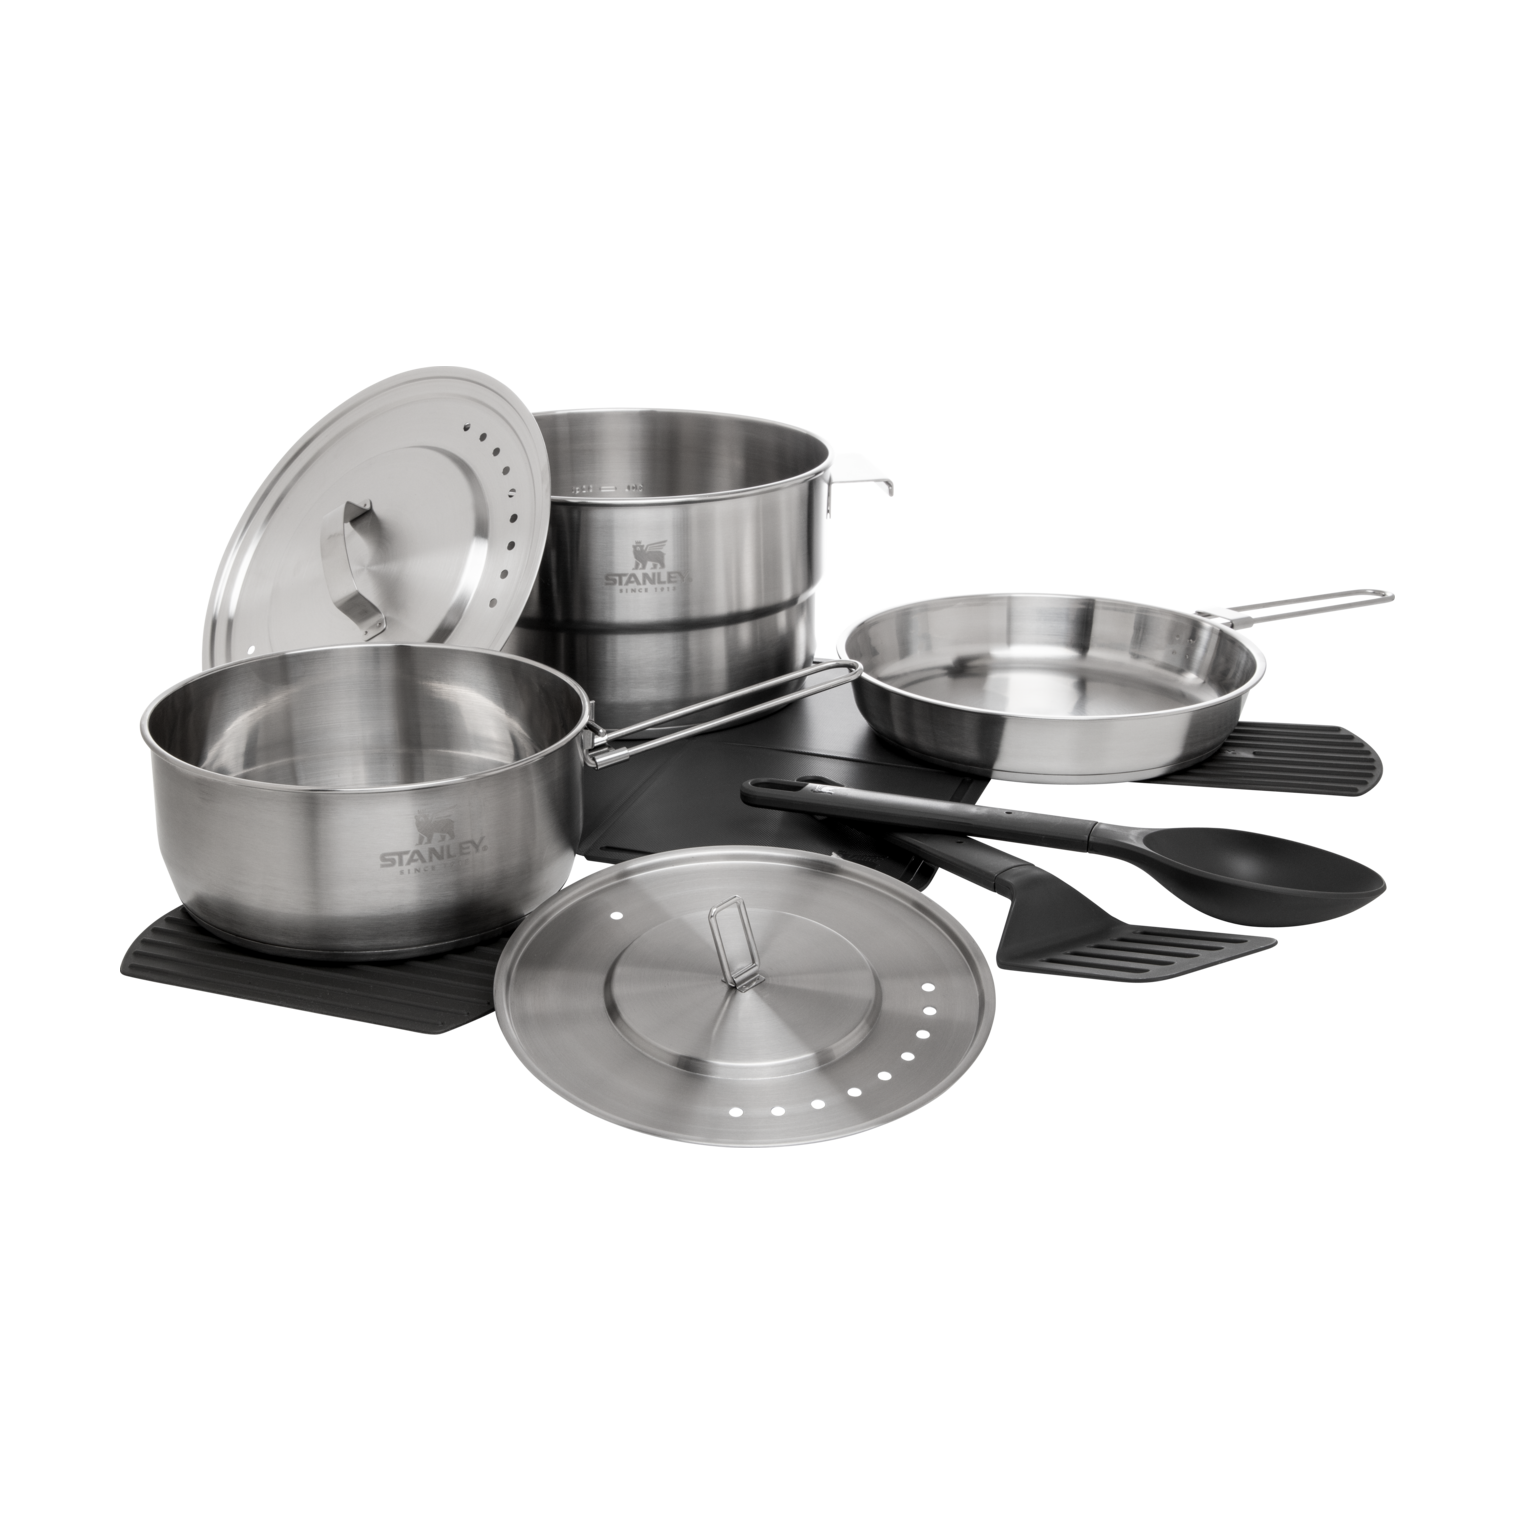 Adventure Even-Heat Camp Pro Cookset: Stainless